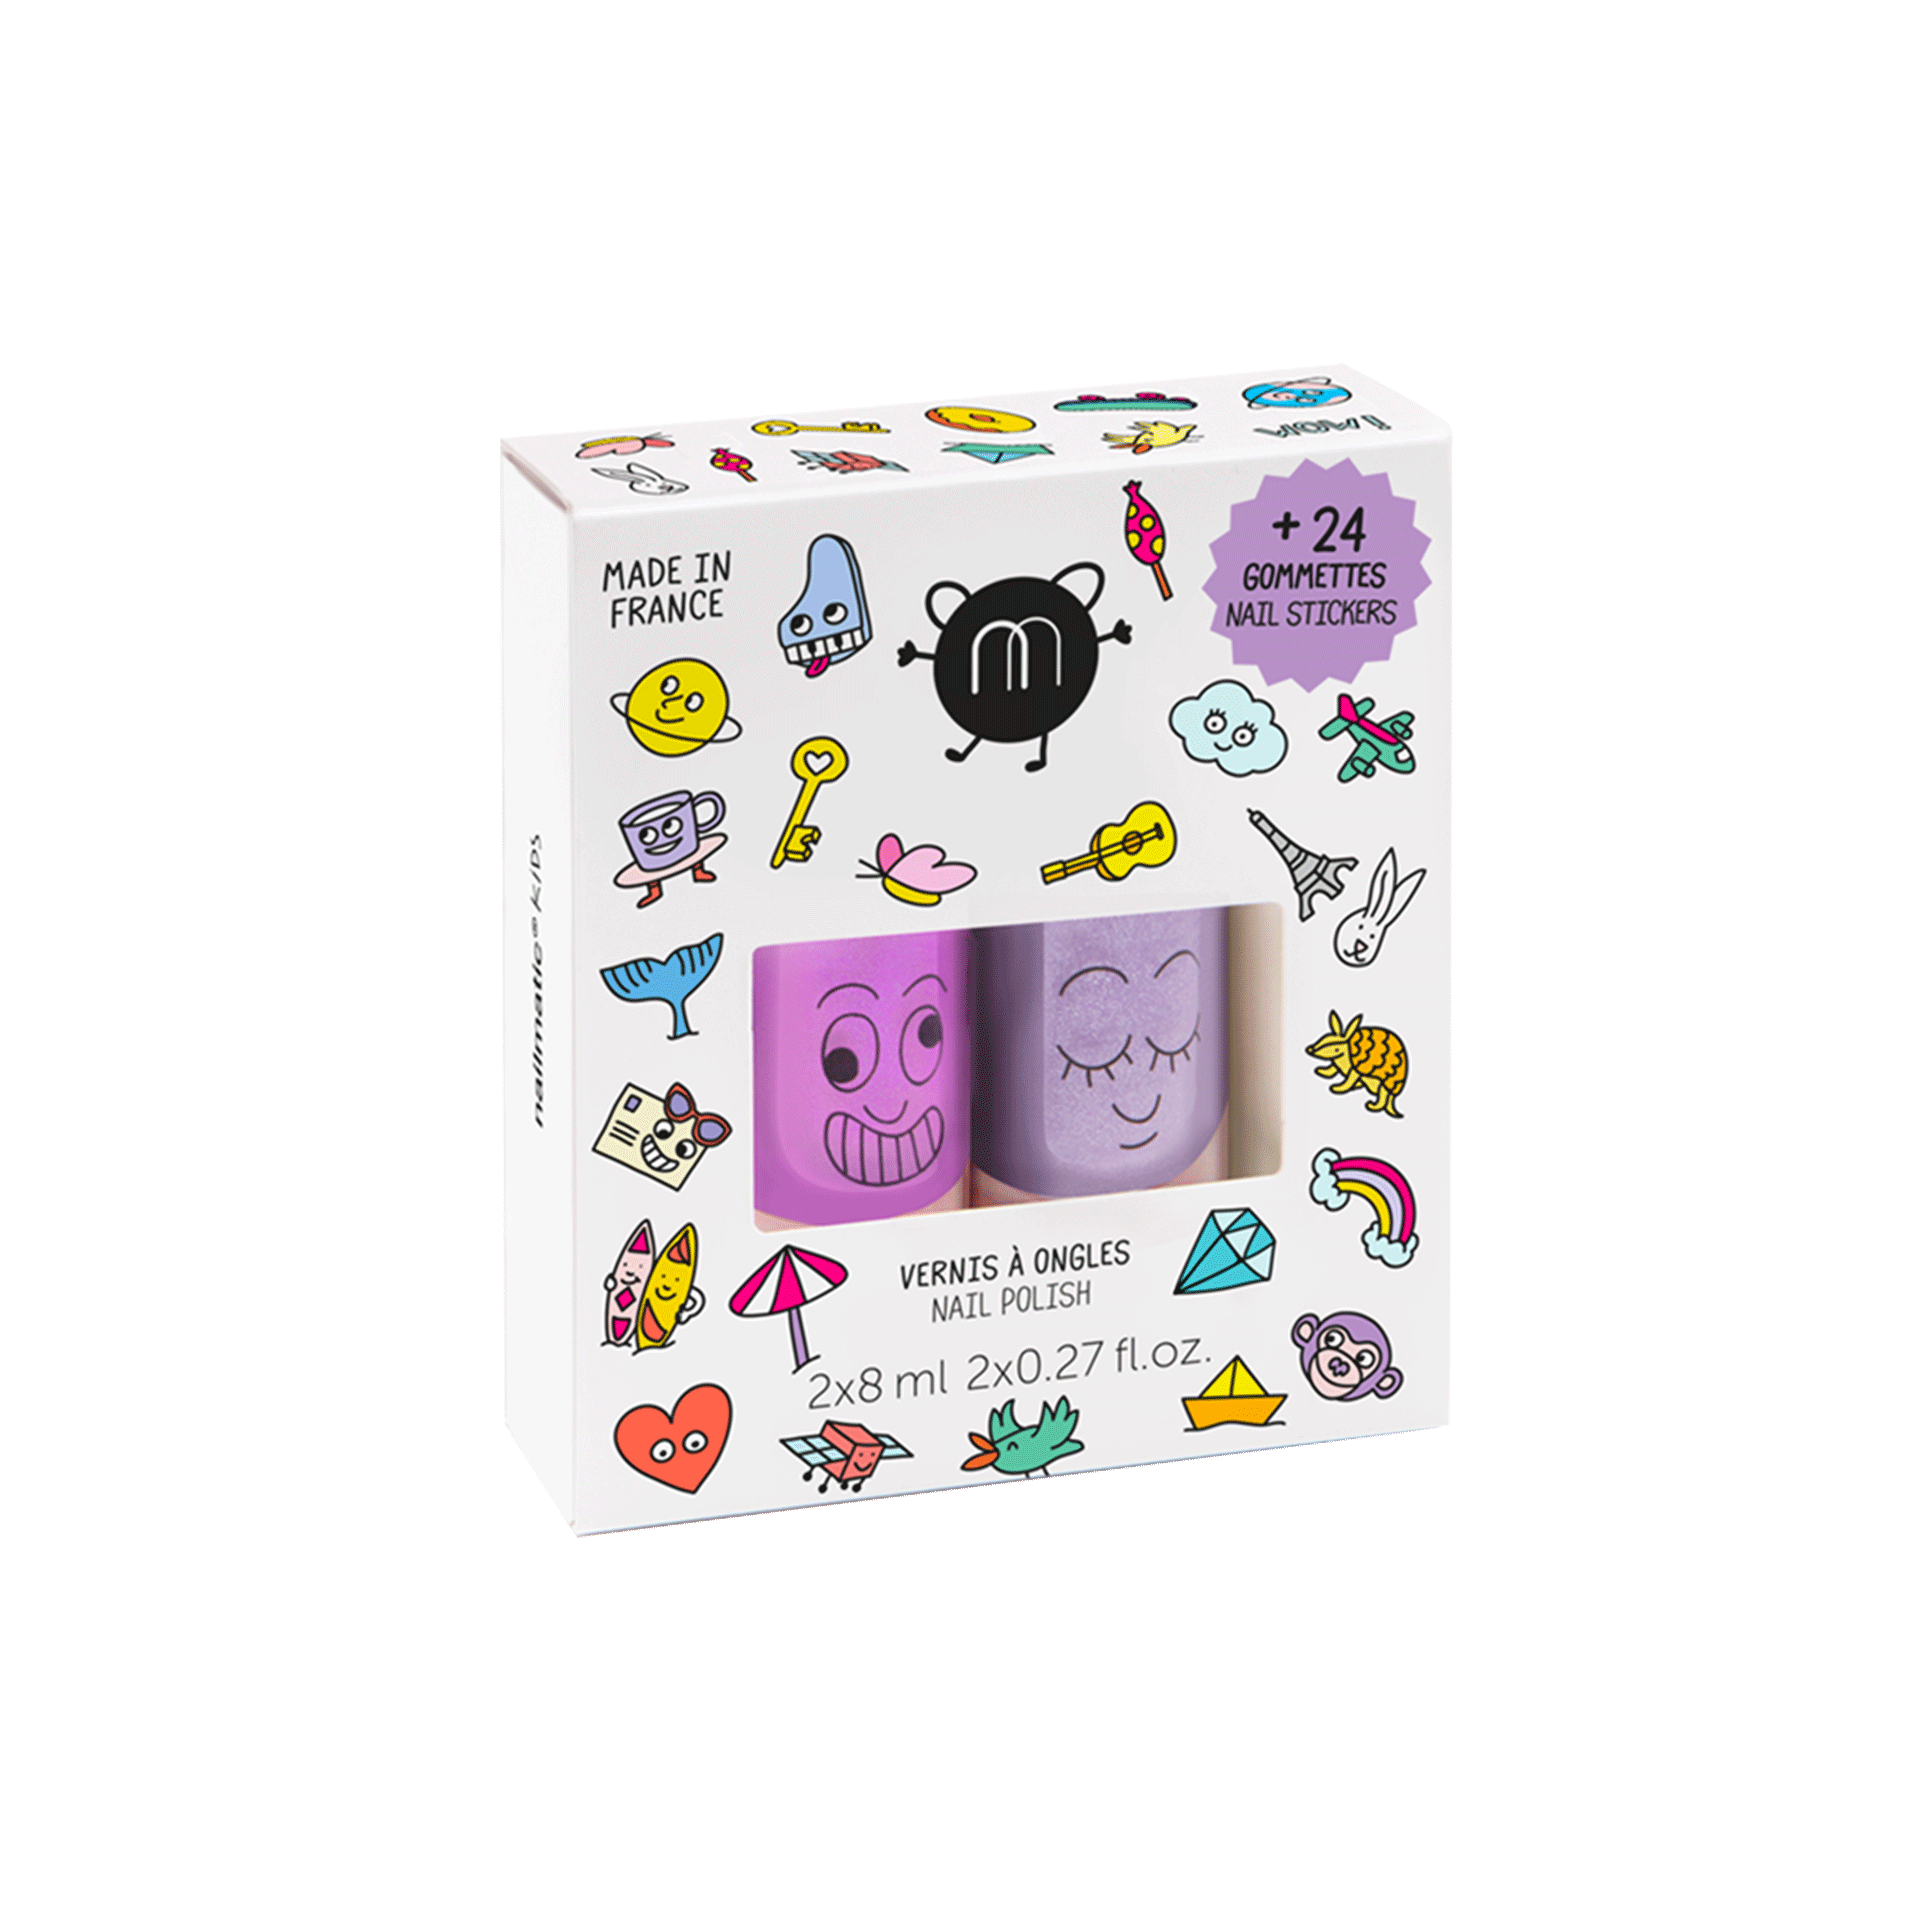 wow vernis + stikers pour ongles coffret vernis à ongles marshi piglou stickers maquillage enfant nailmatic kids